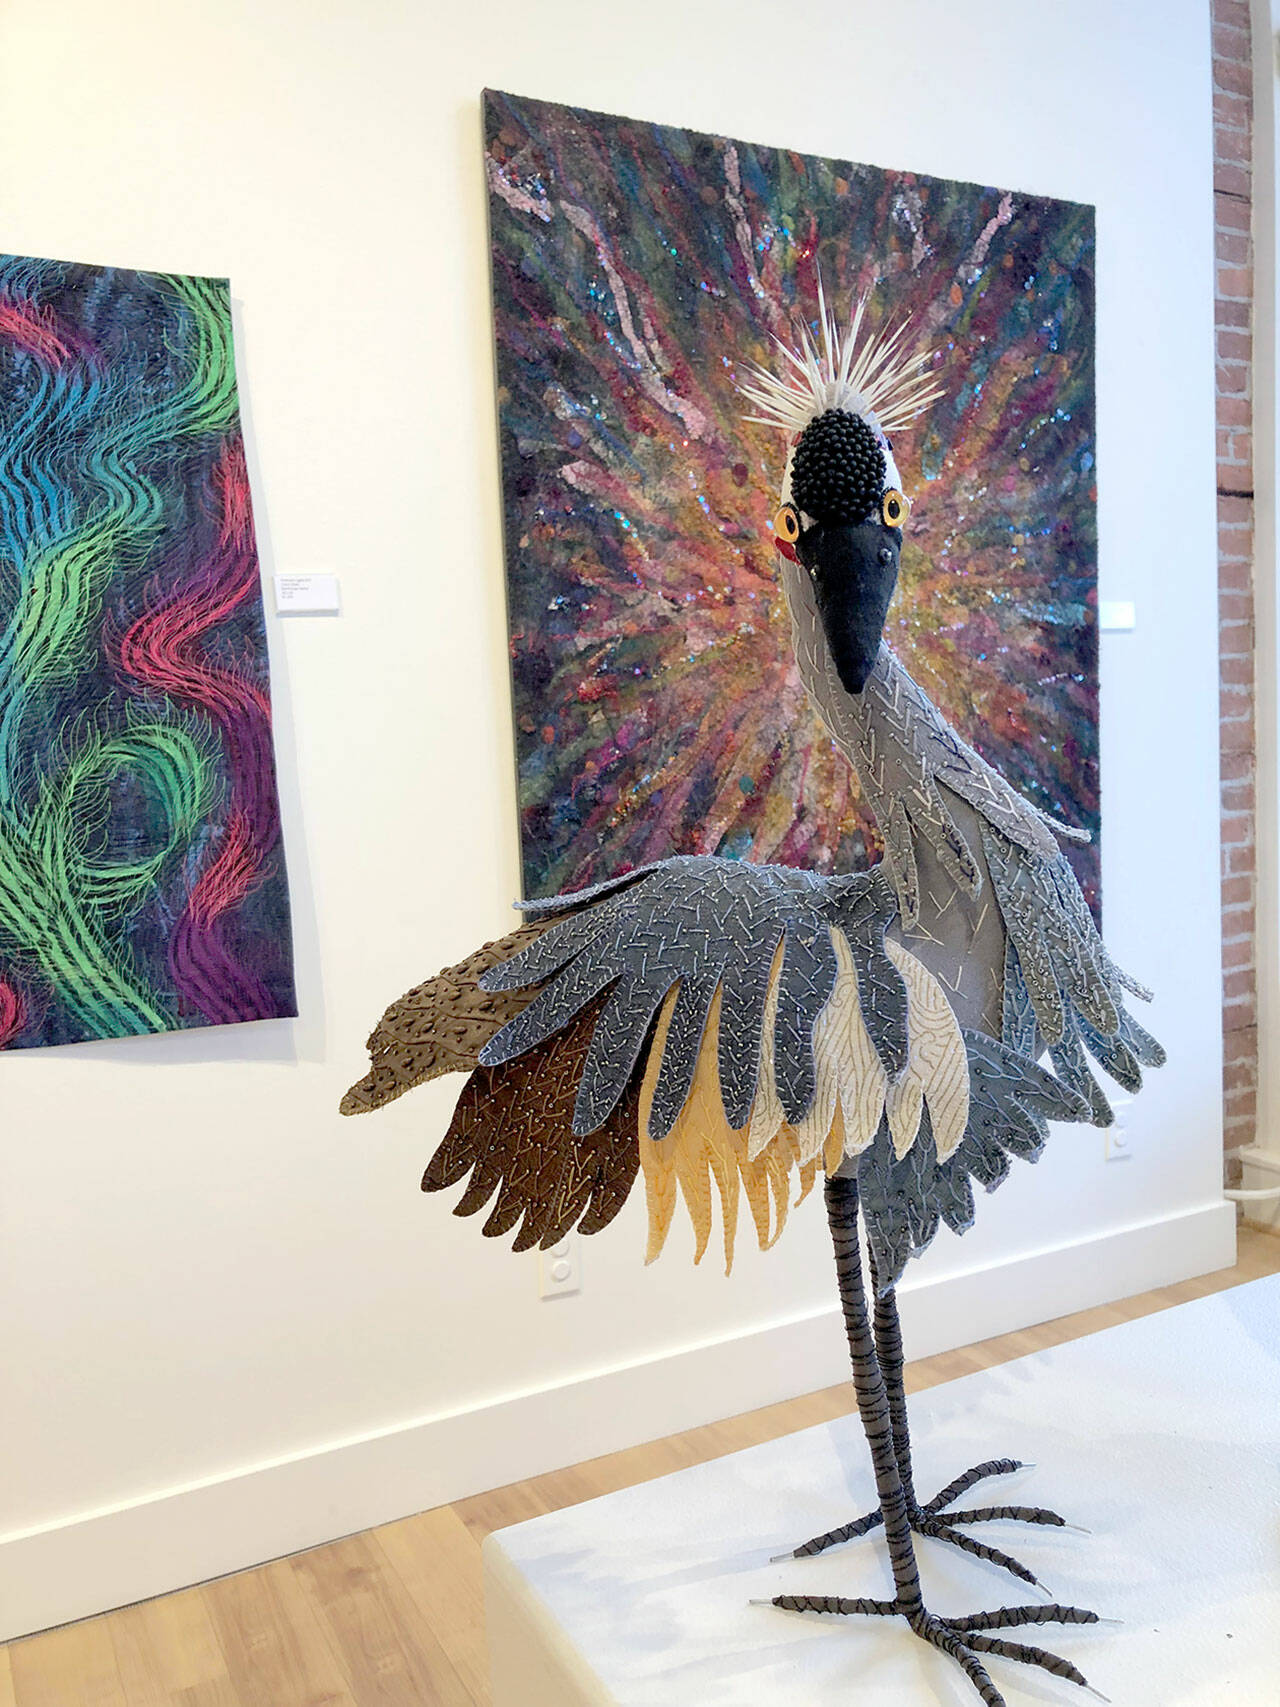 Pat Herkal’s “African Crowned Crane” is among the fiber art works in “Burst of Color,” the show at Northwind Art’s gallery in Port Townsend. (Diane Urbani/Northwind Art)